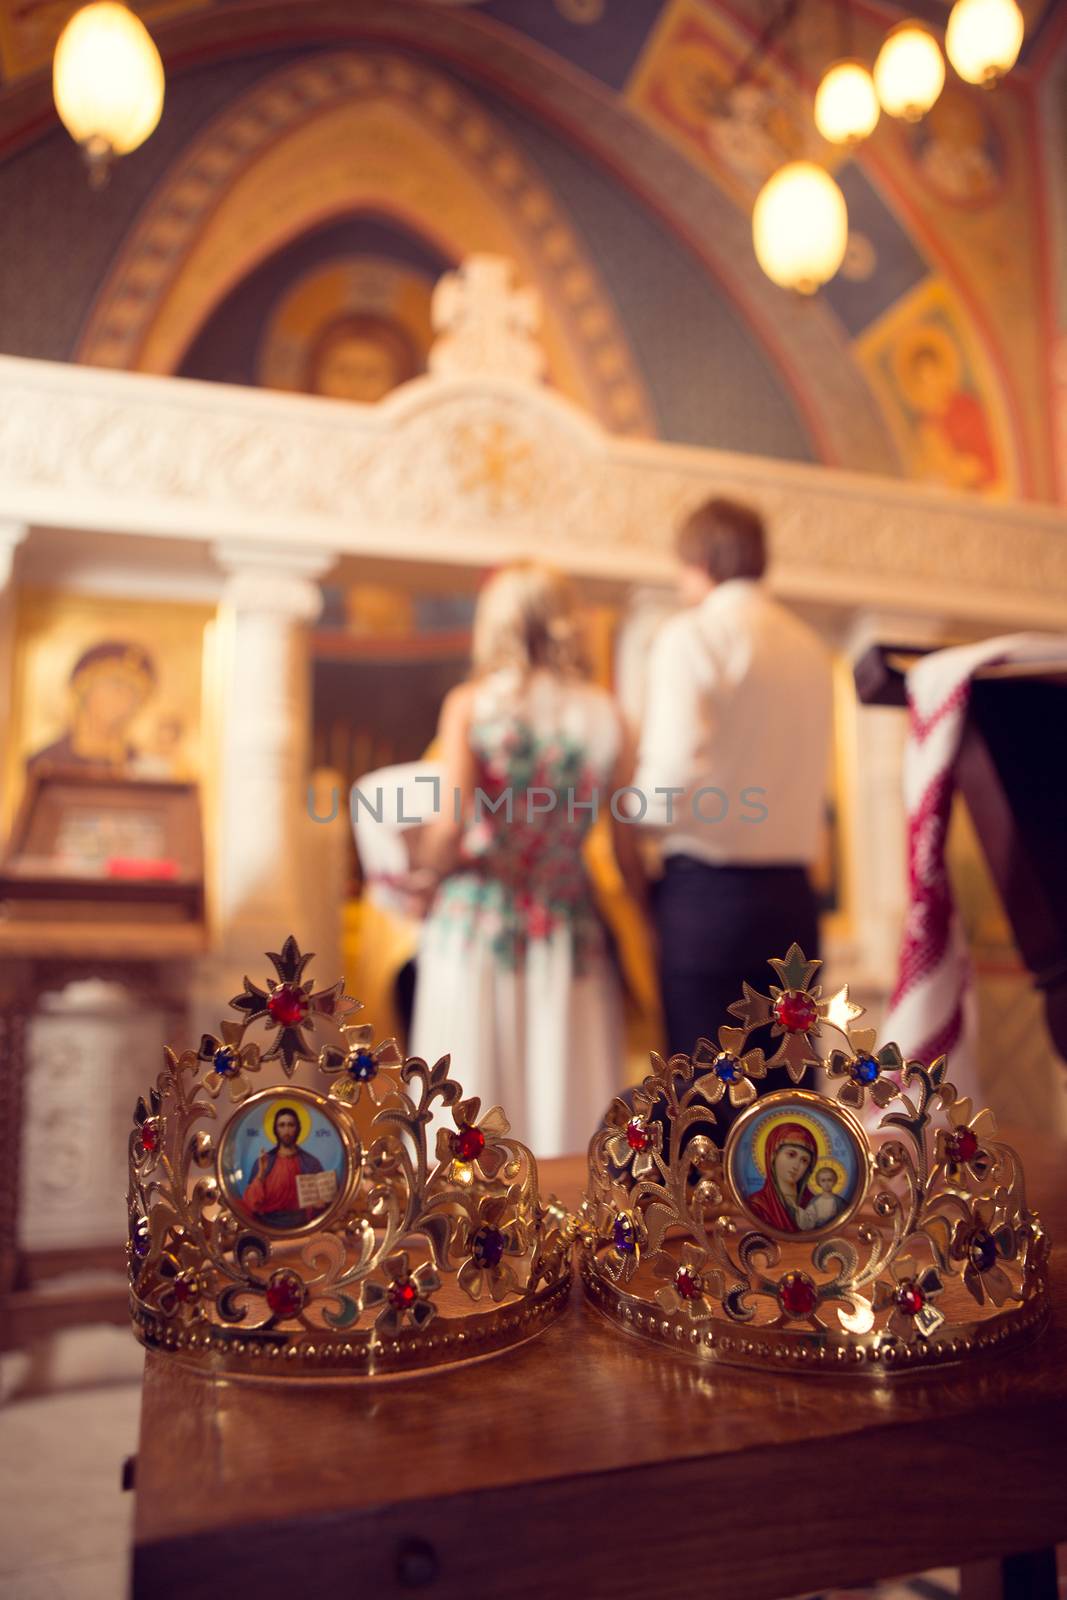 Bride and groom at the church during a wedding ceremony